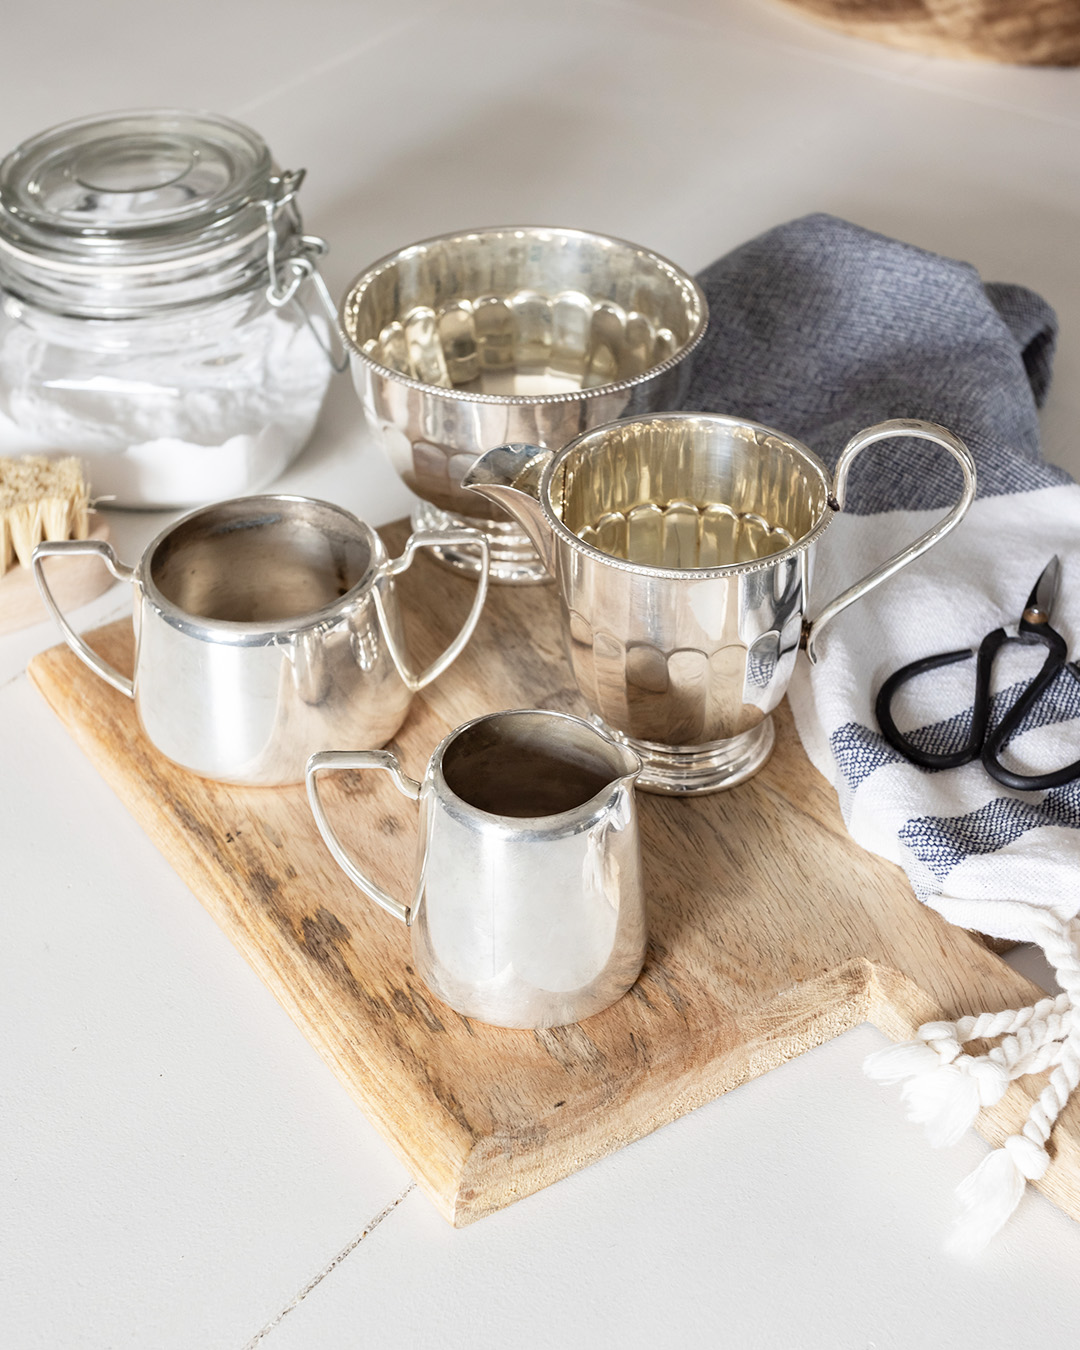 Clean silver pieces that are free of tarnish.